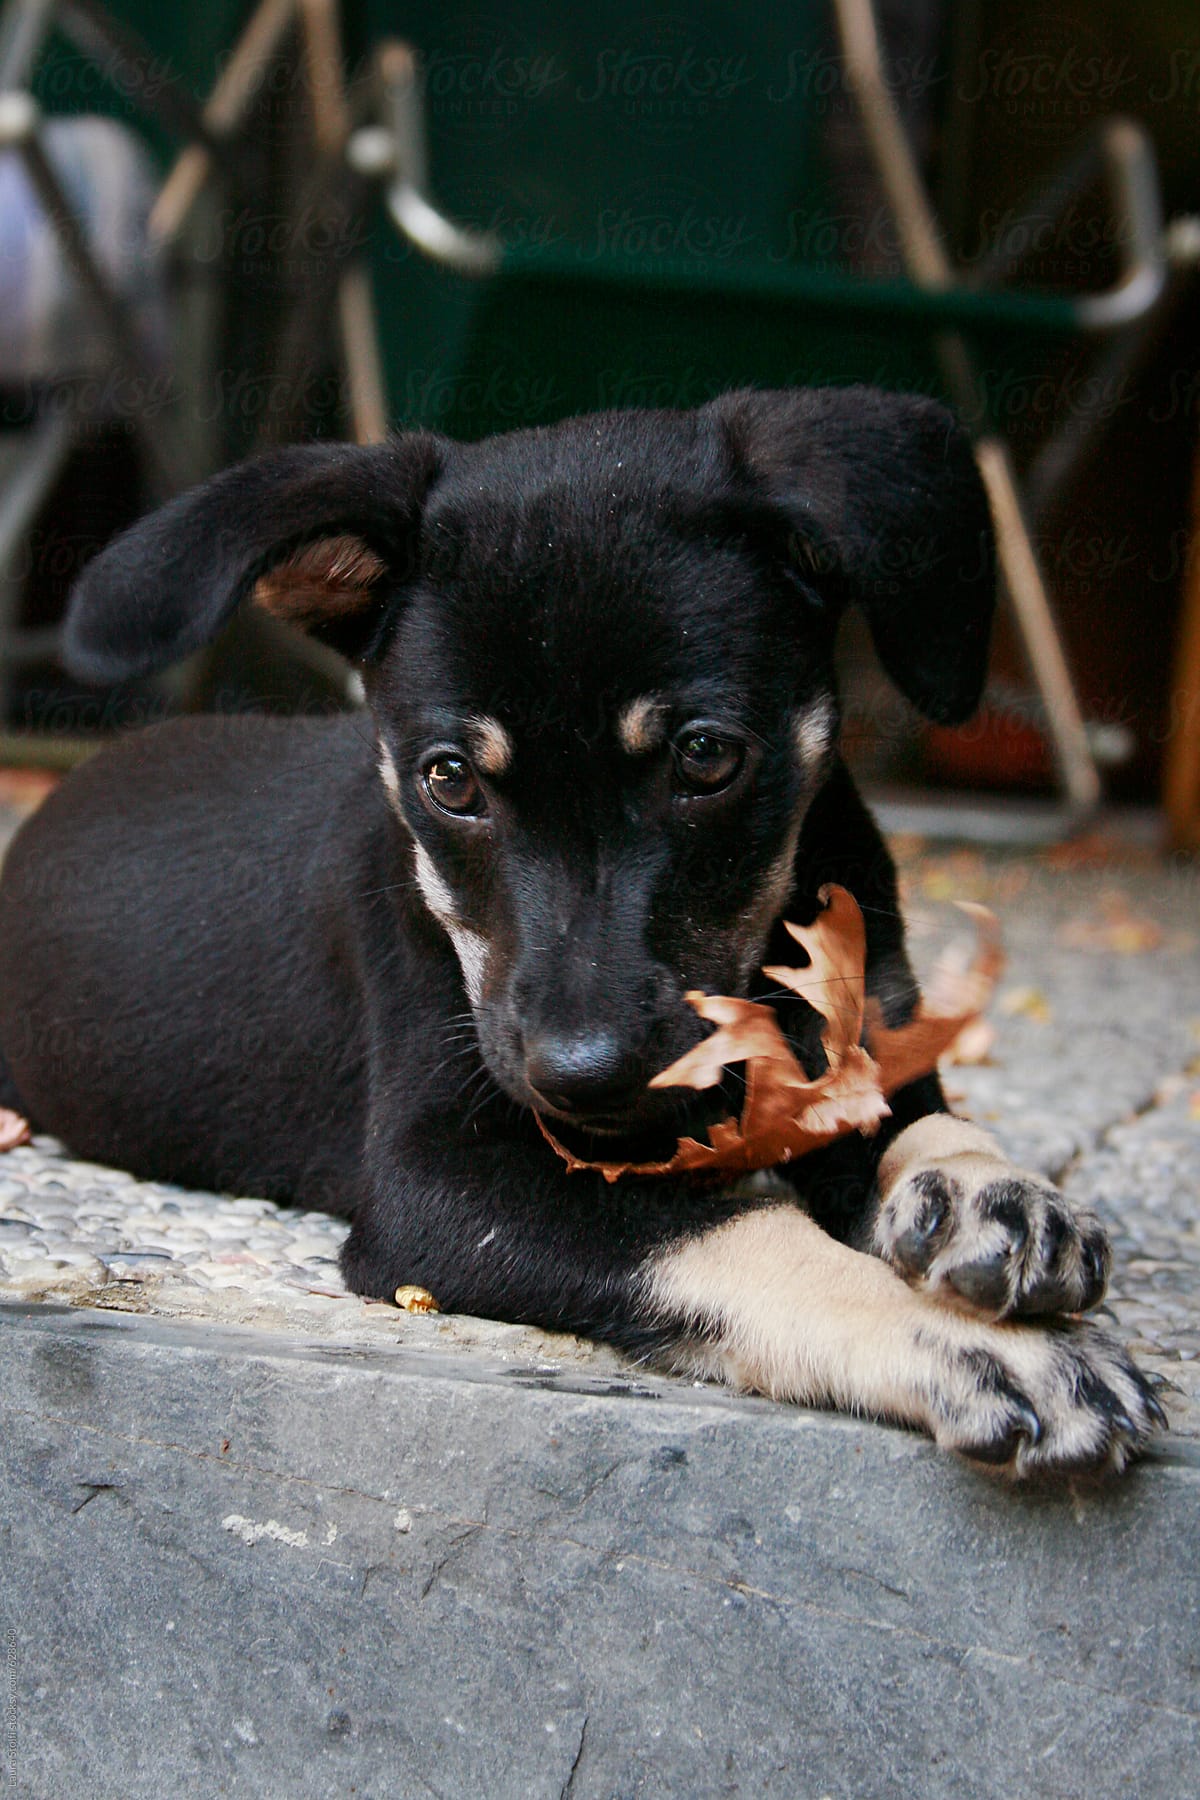 Close up of puppy dog chewing a fallen leaf